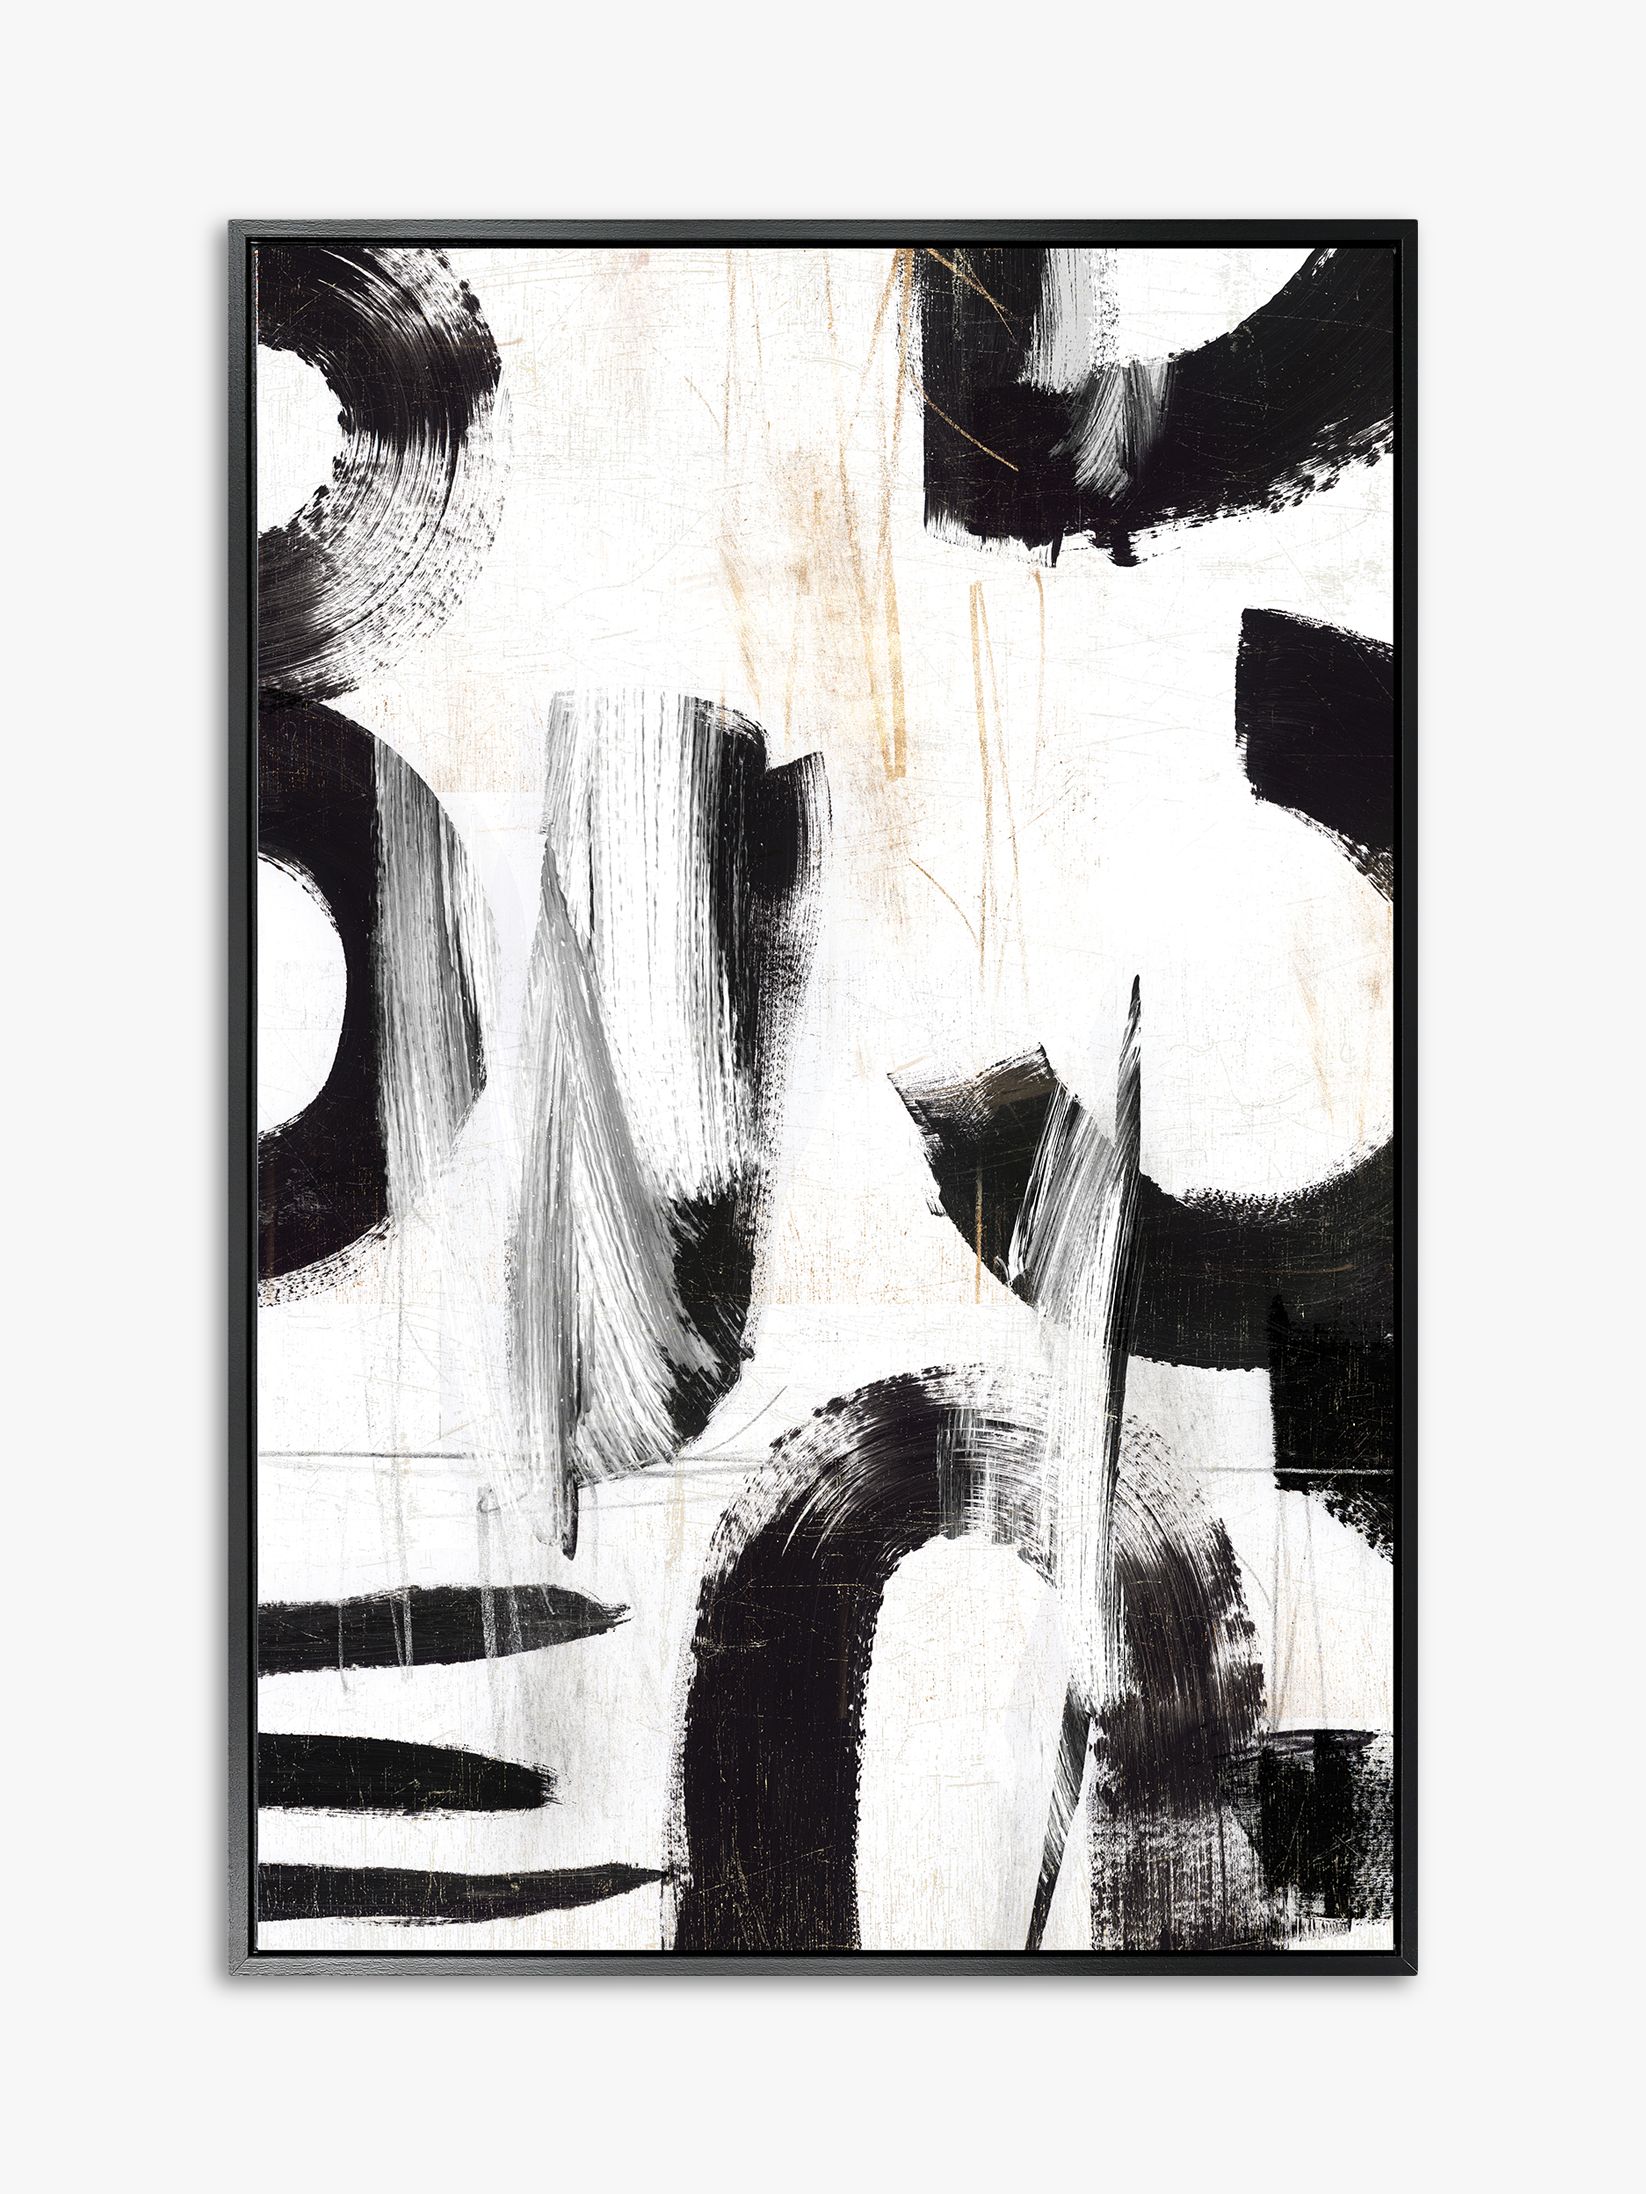 Concept Iii Abstract Framed Canvas Print 124 5 X 84 5cm Black White At John Lewis Partners